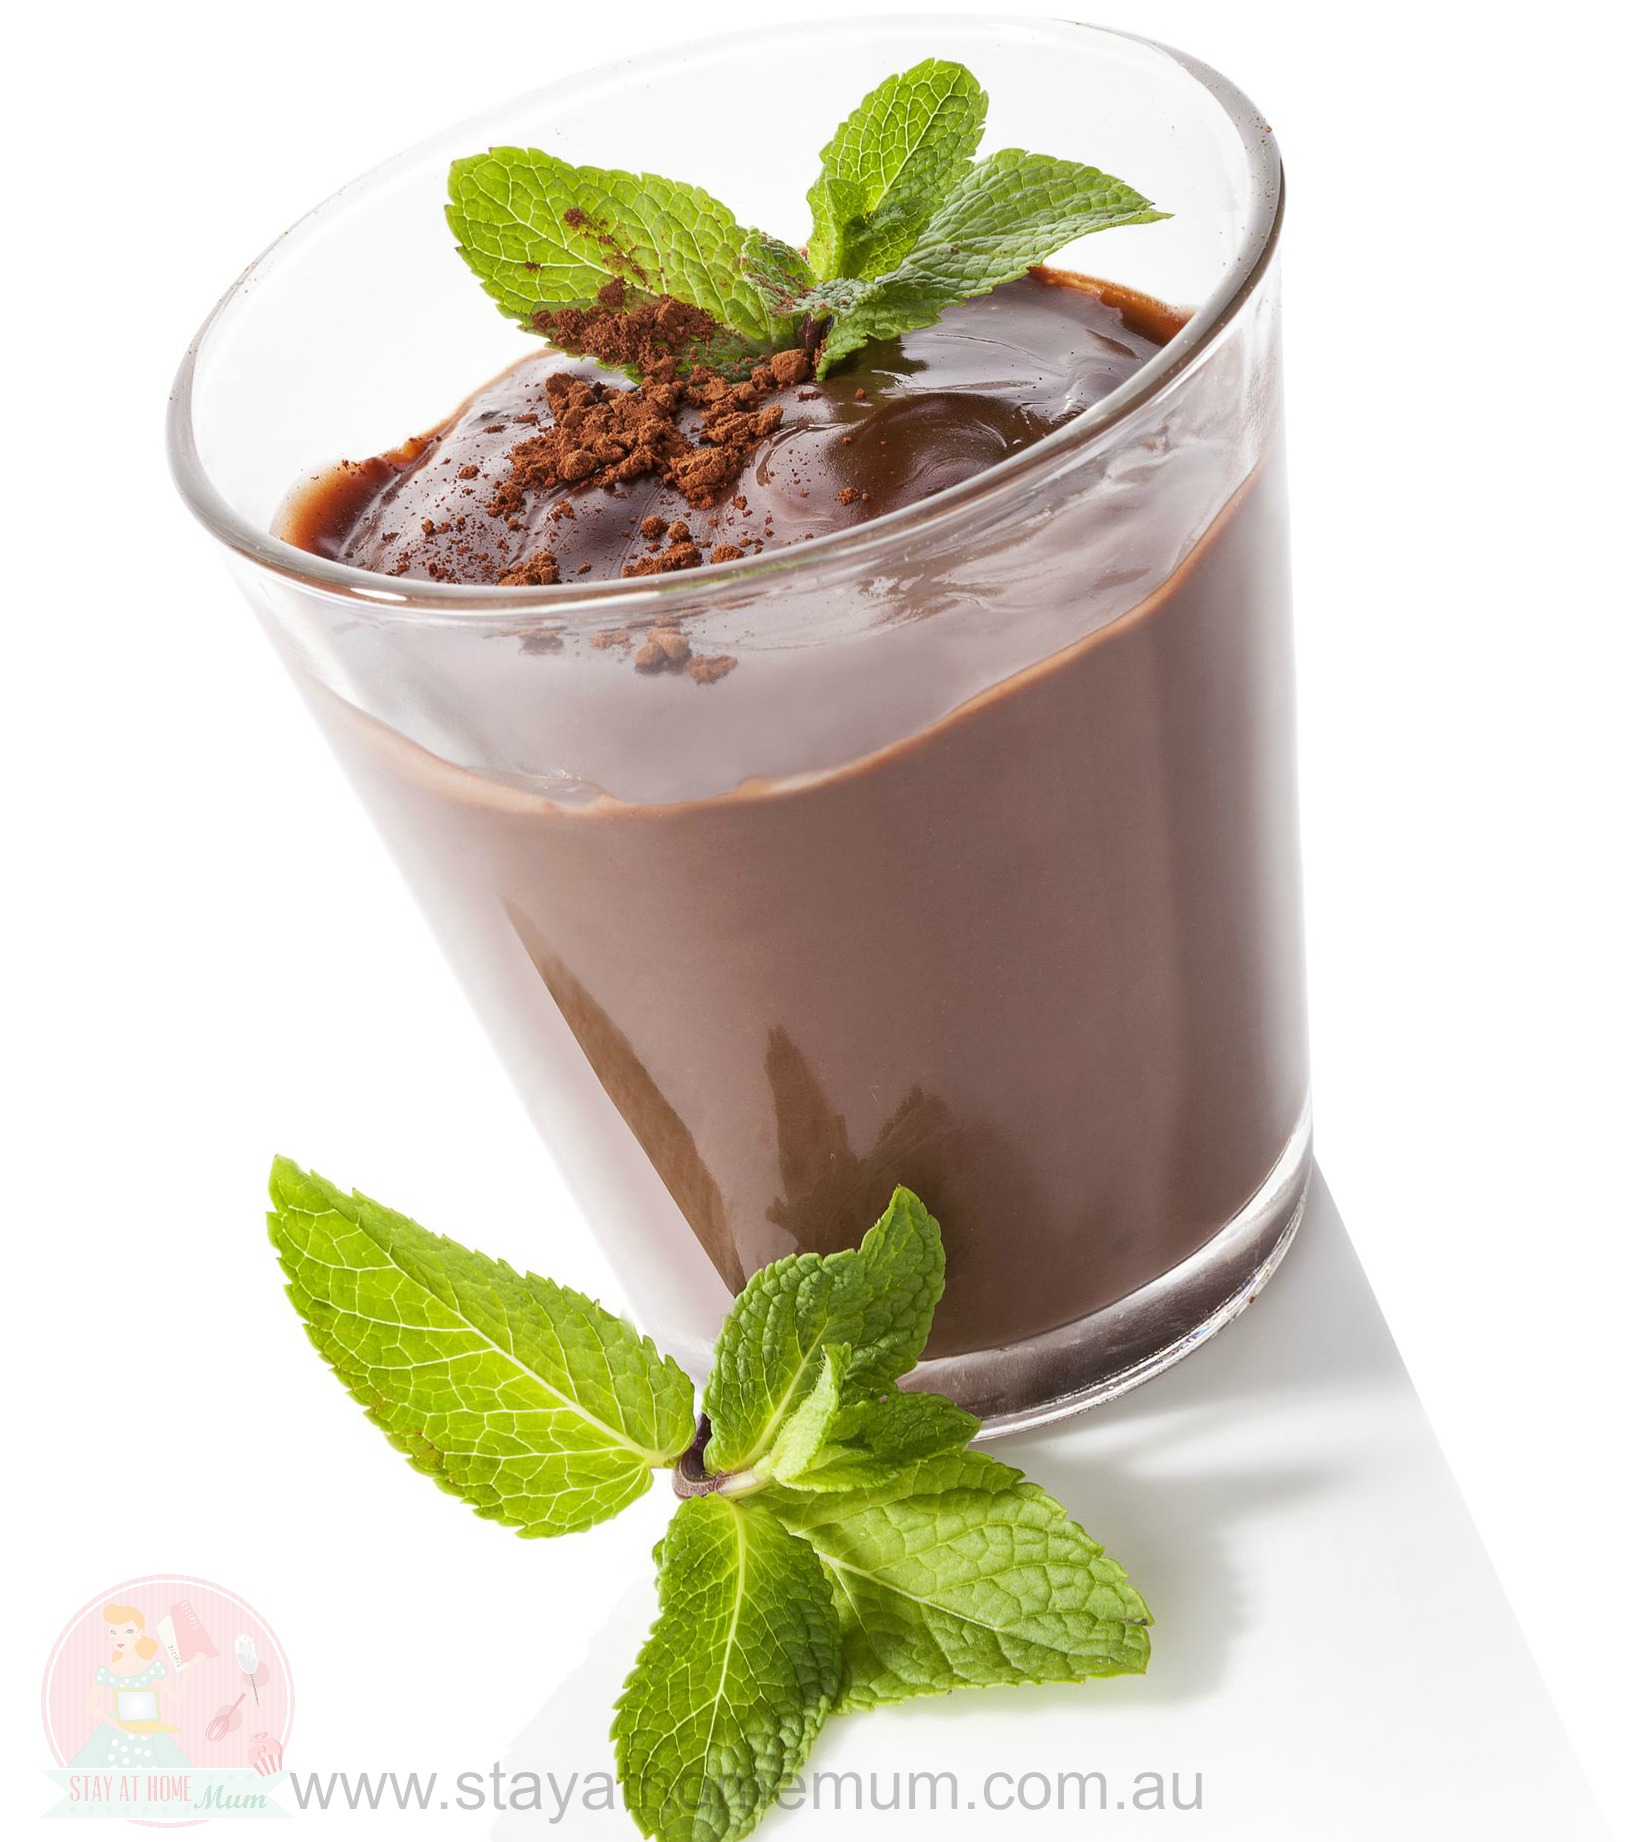 Healthy Chocolate Mint Pudding